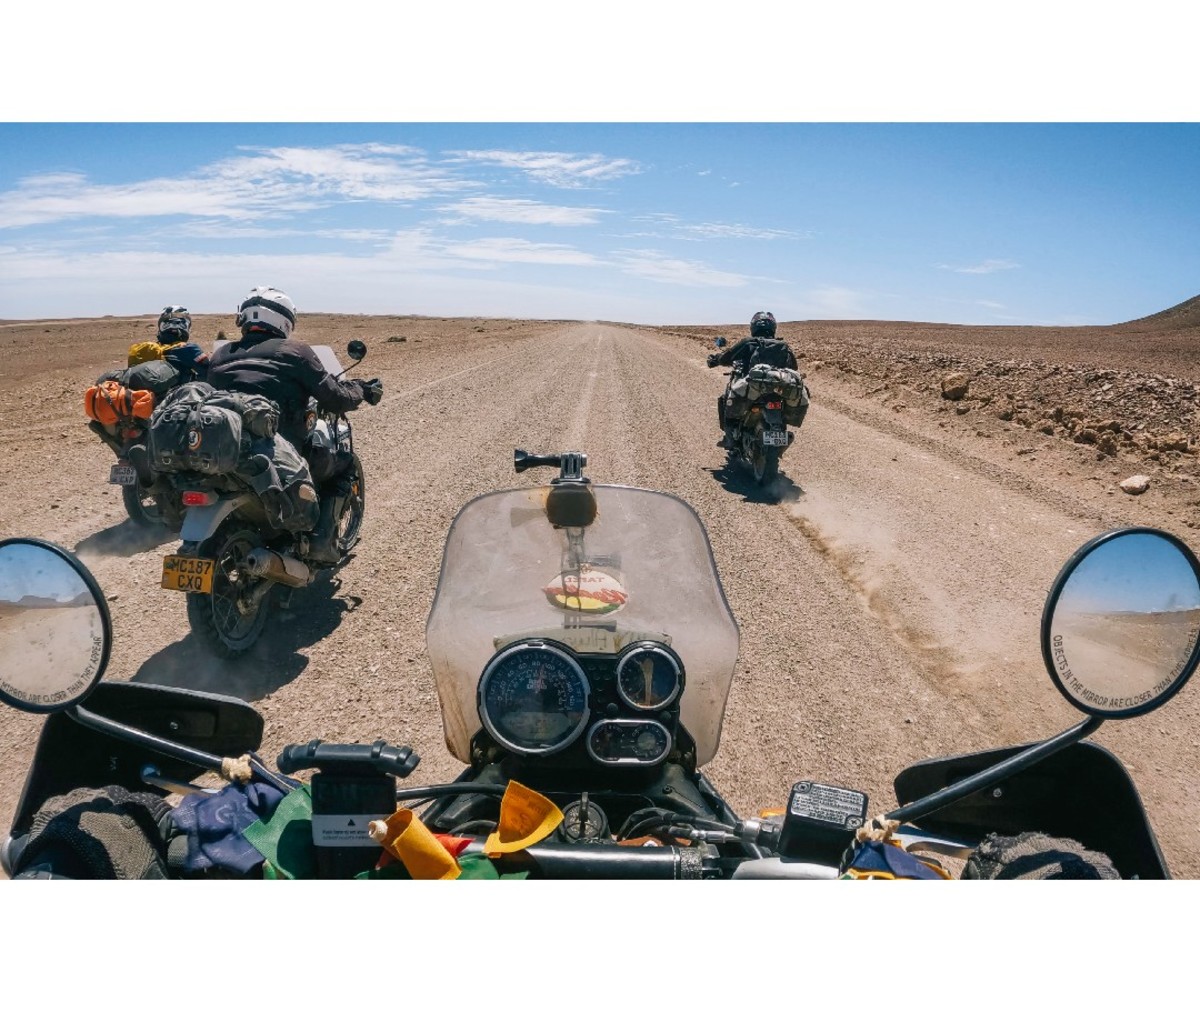 Motorcyclists riding through the desert on a long straight dirt road